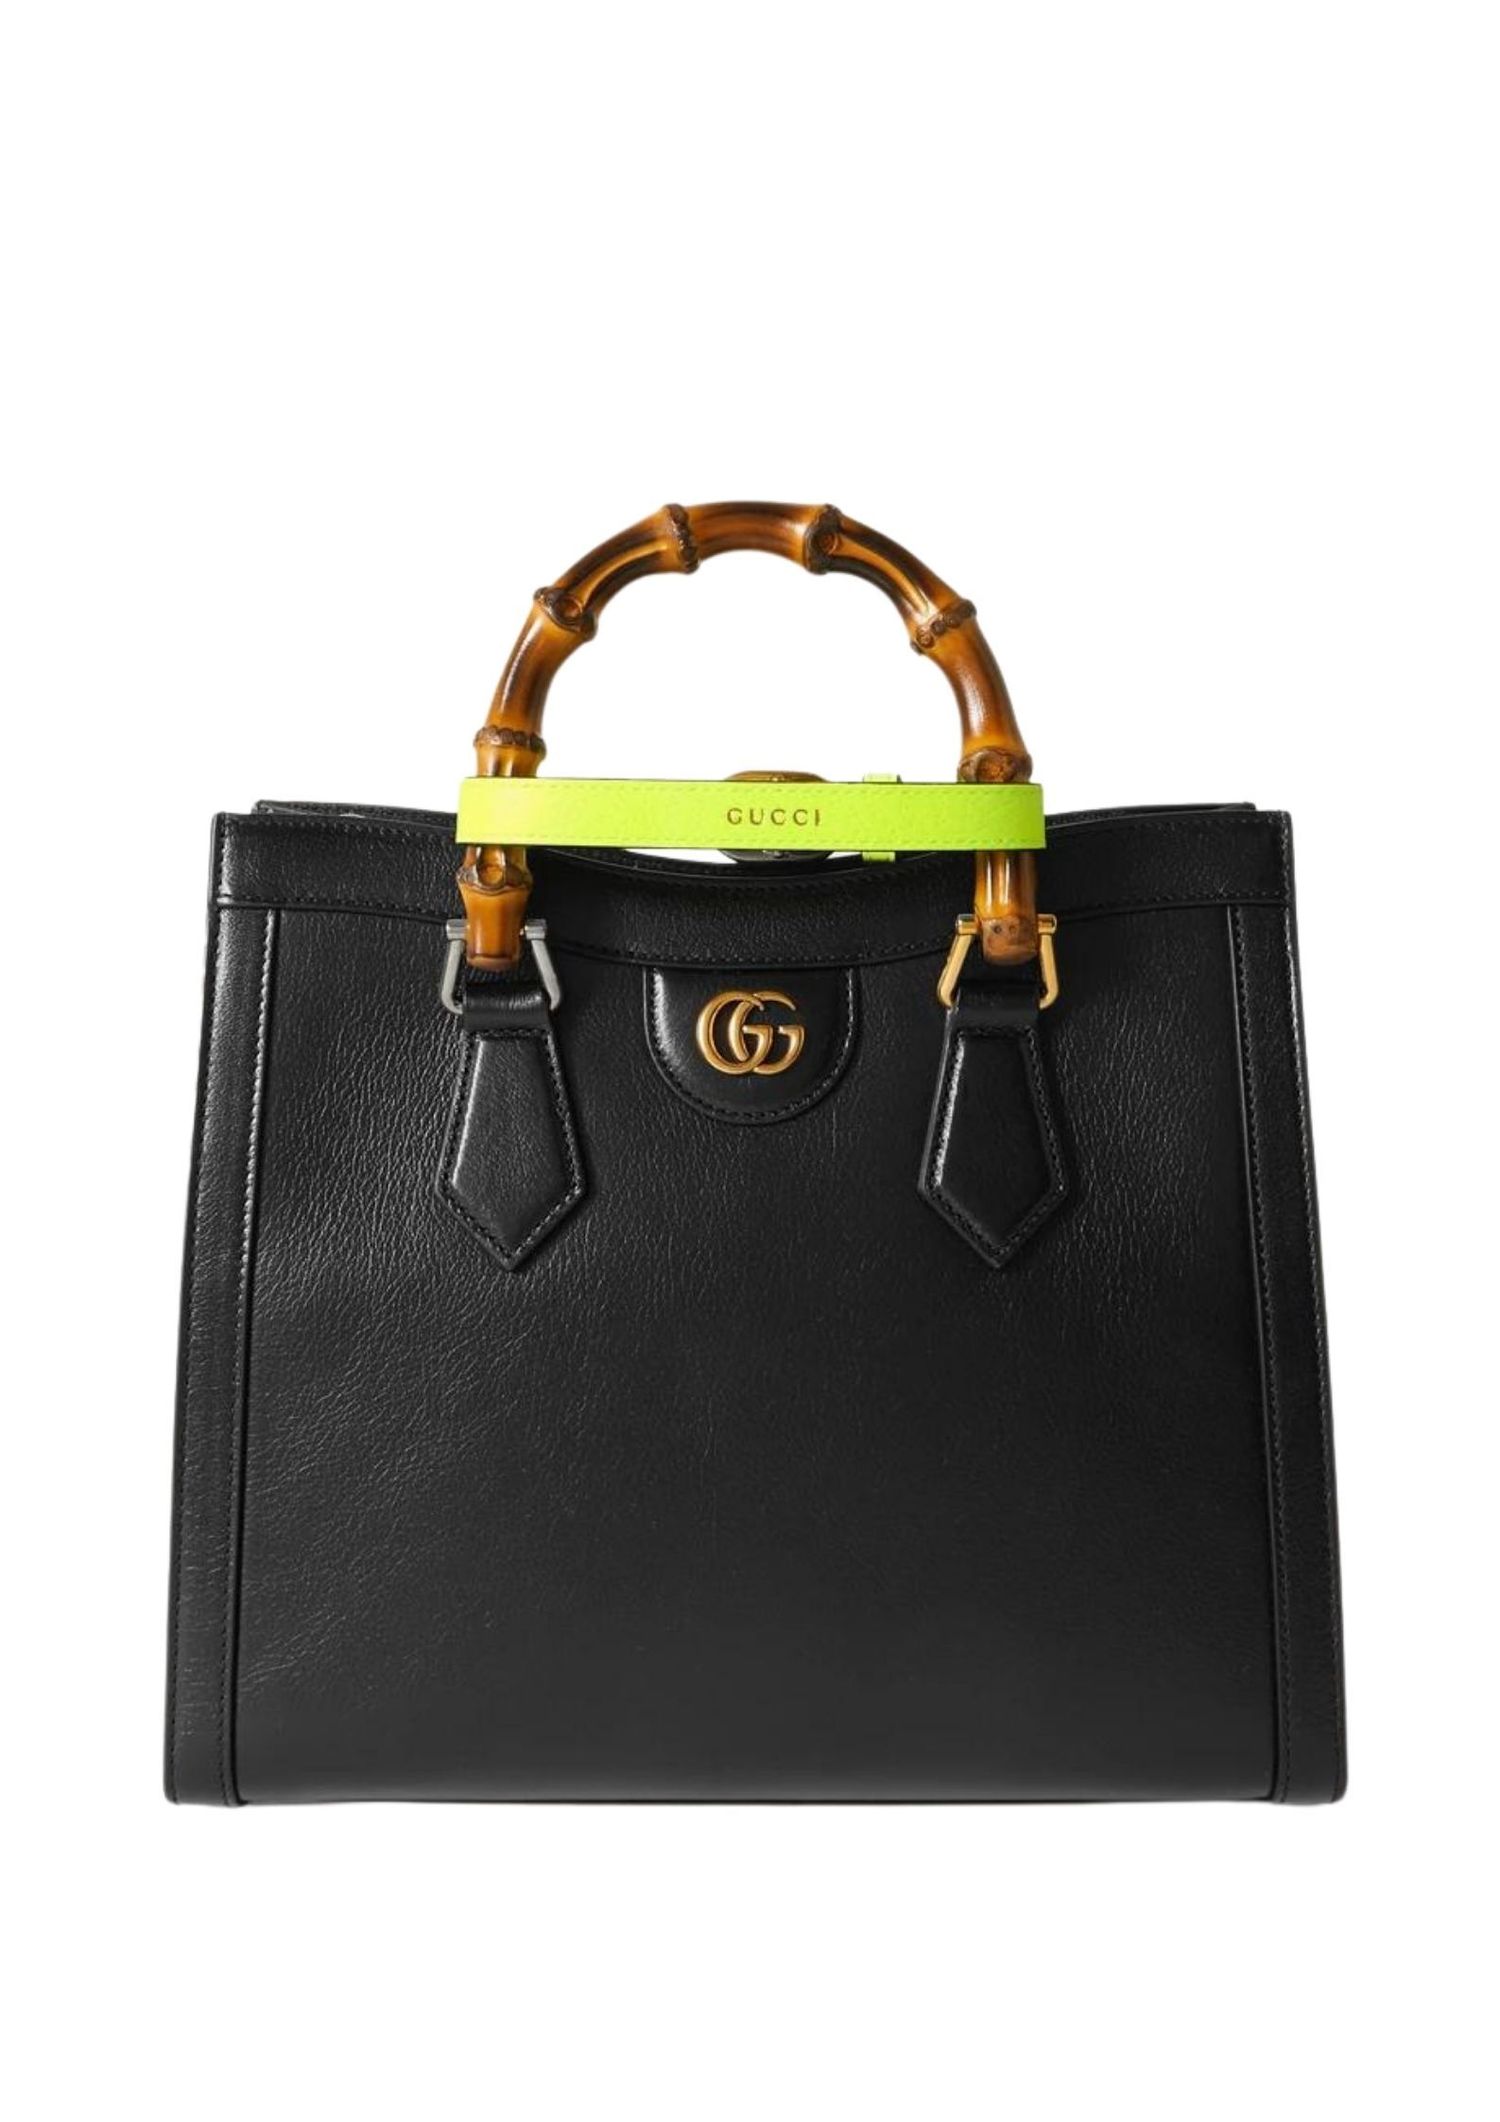 Gucci Diana small textured-leather tote